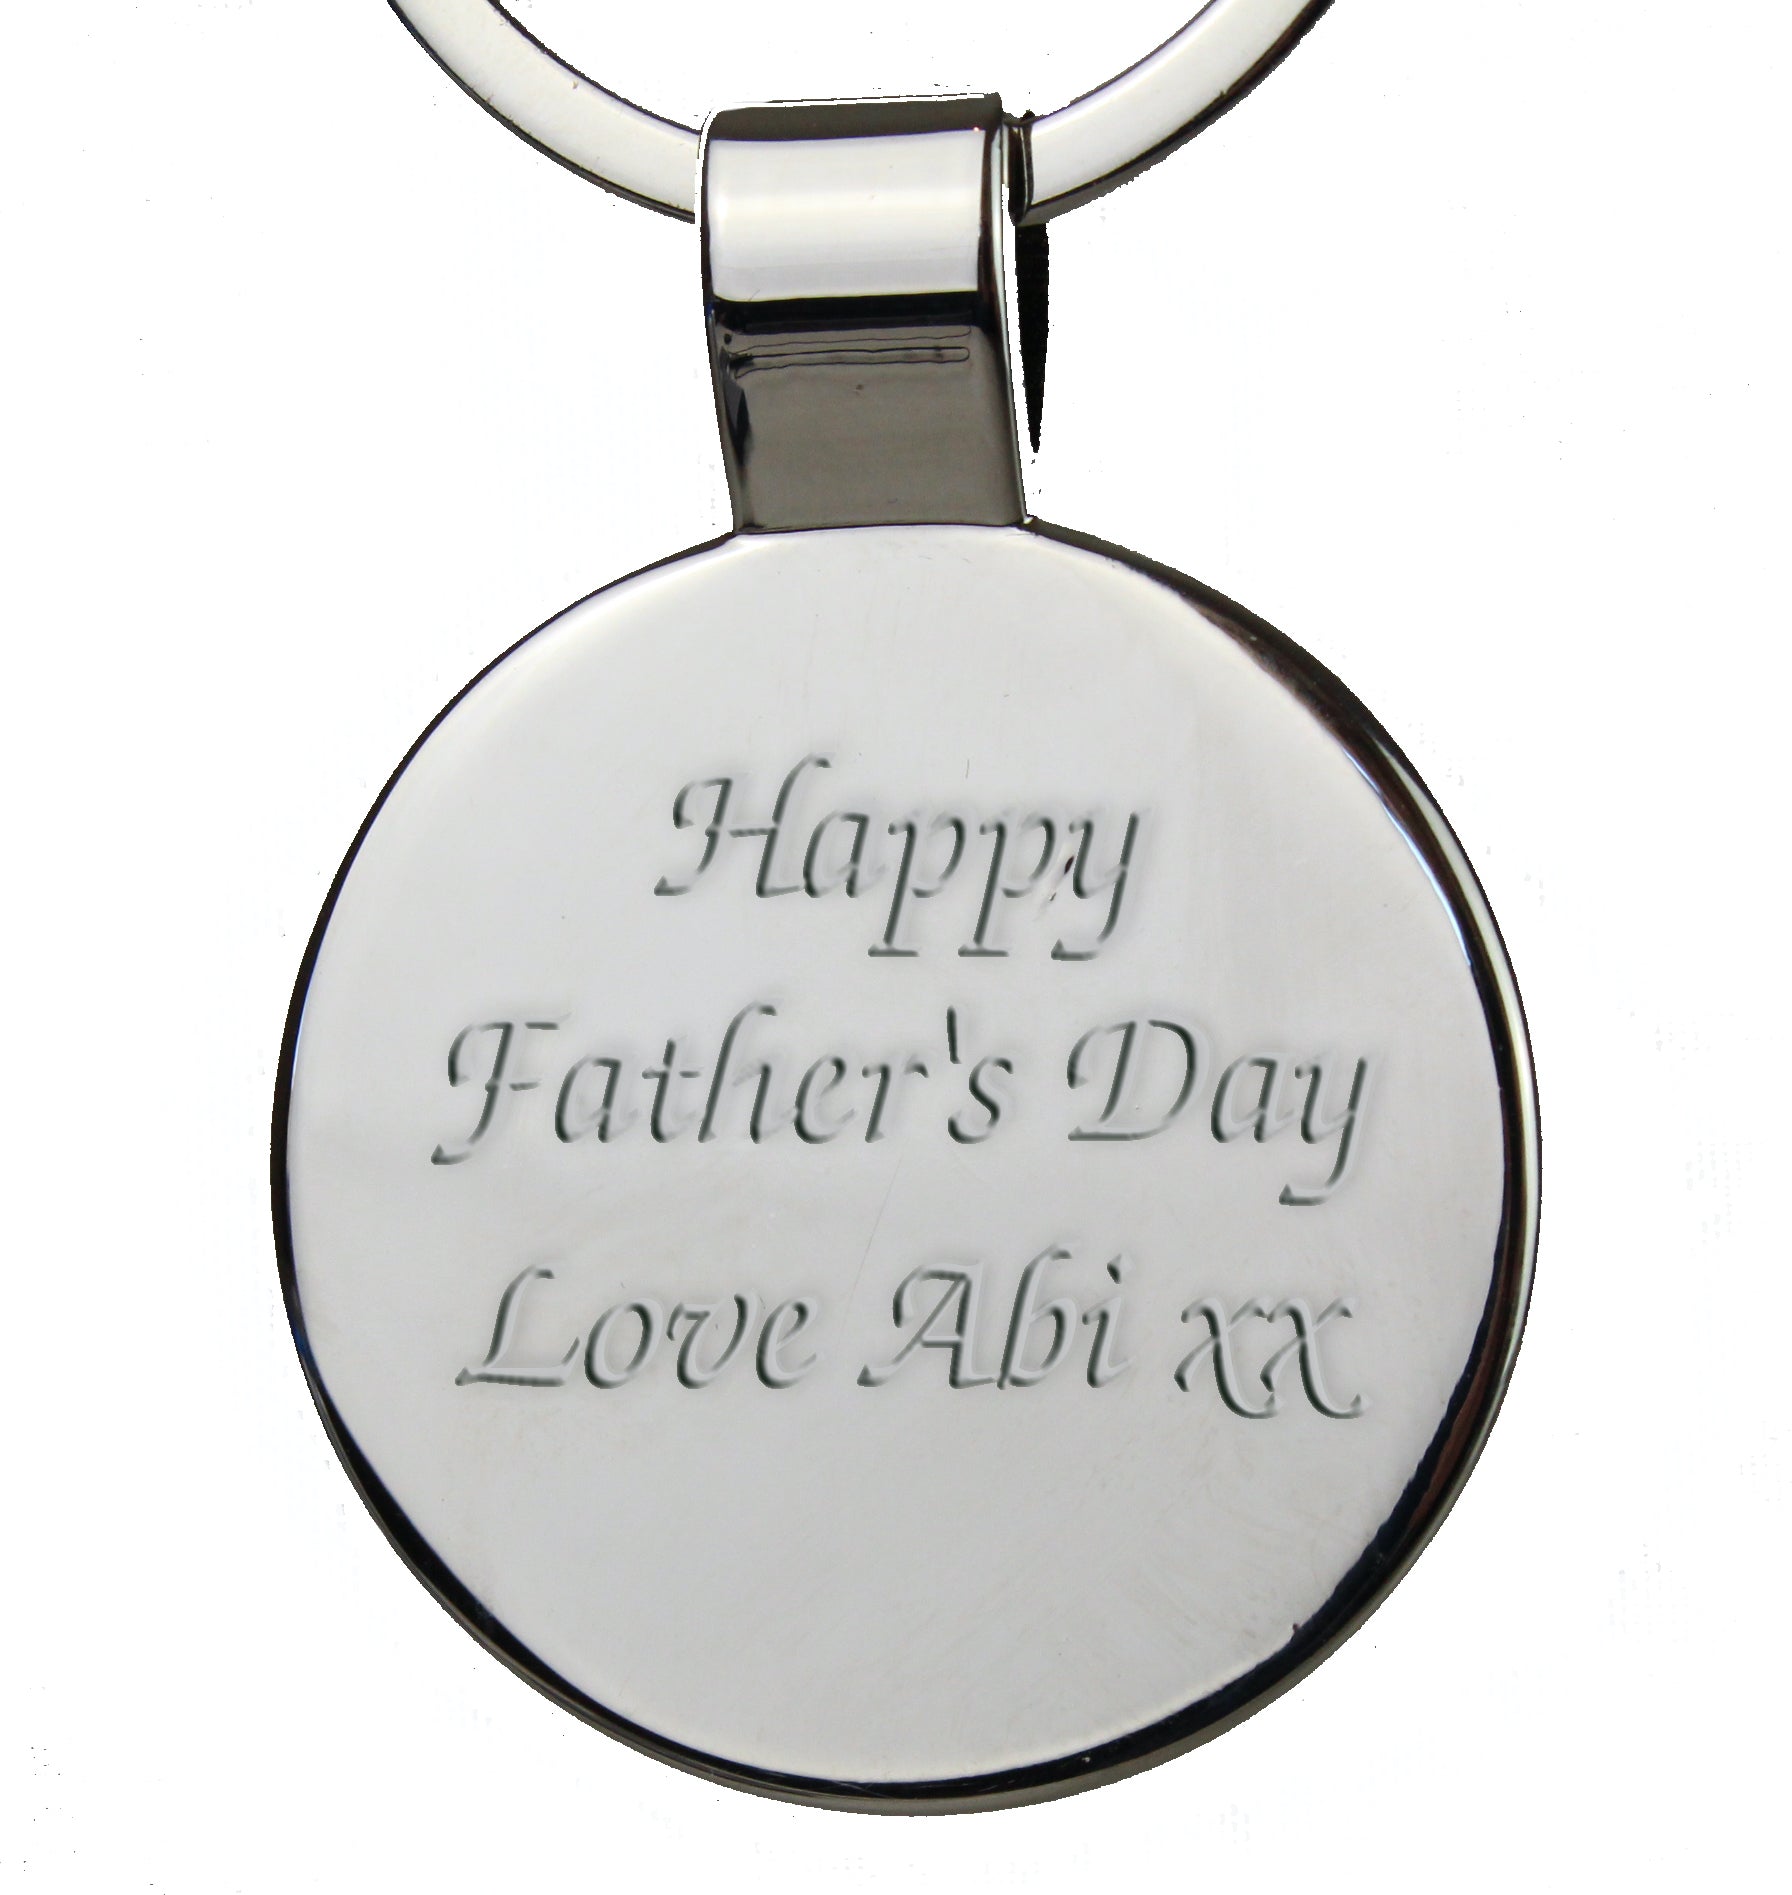 Close up shot of engraved modern font that says "Happy Father's Day Love Abi xx" on the back of golf keyring.